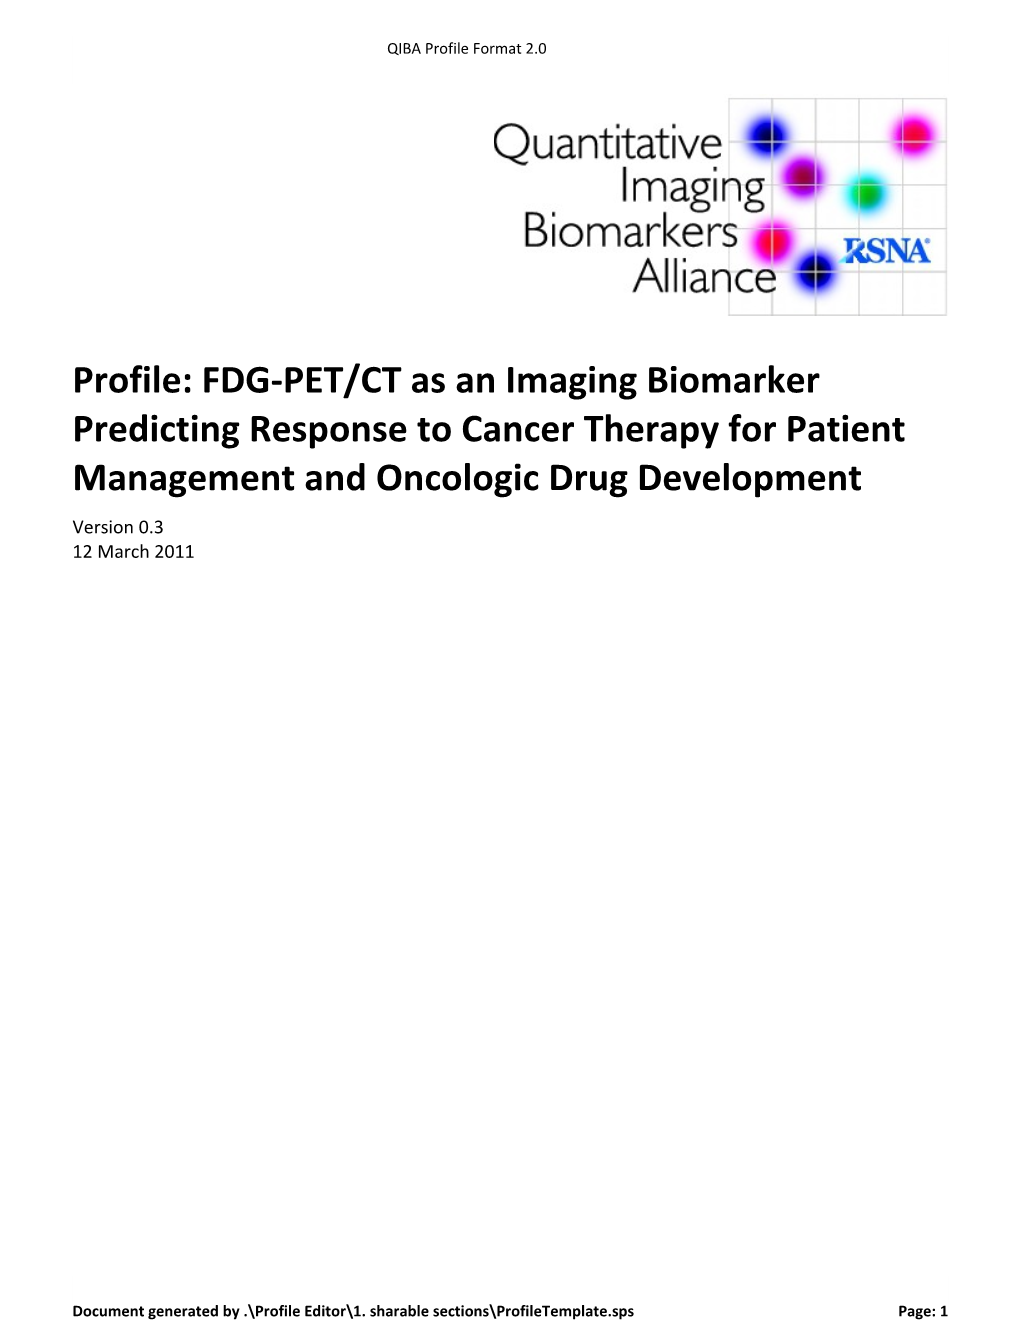 Profile: FDG-PET/CT As an Imaging Biomarker Predicting Response to Cancer Therapy For